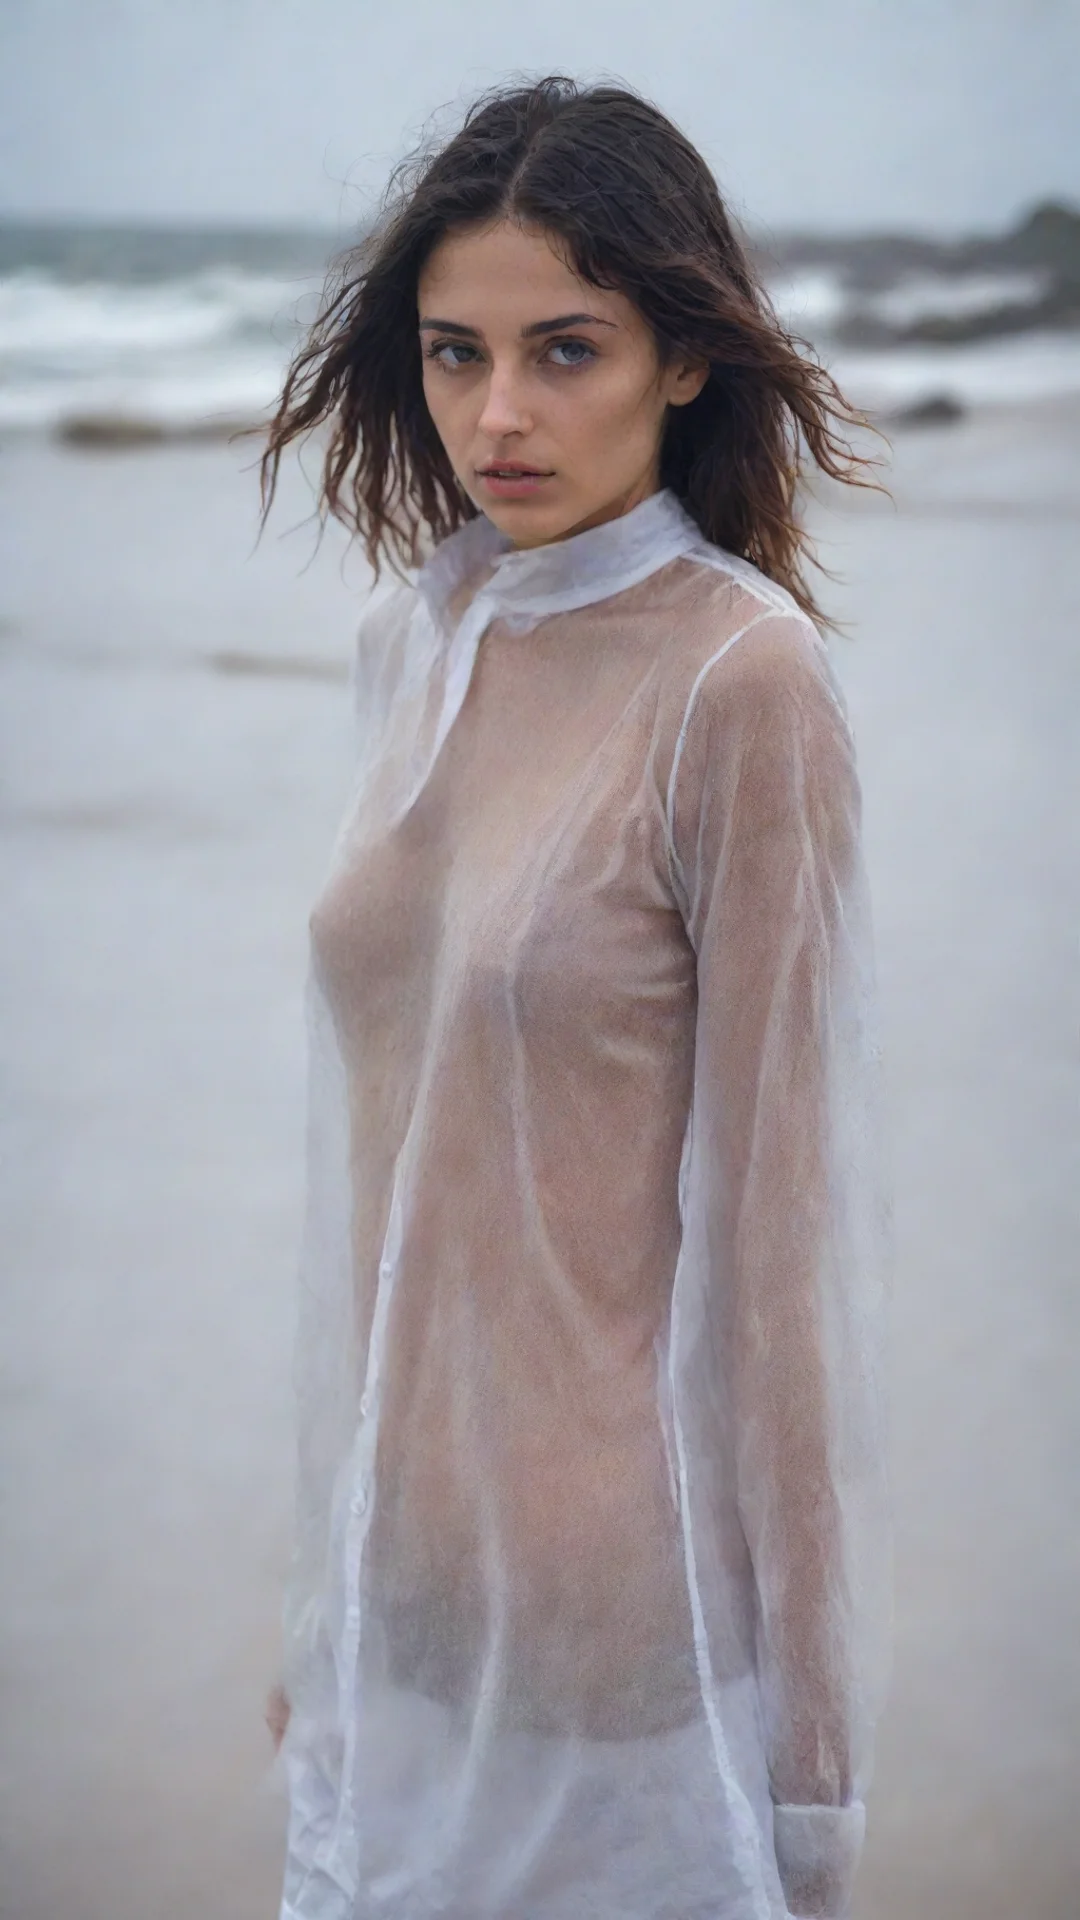 aiartstation art sensual portrait of a lonely young italian woman in a thin transparent white shirt at a wet and rainy beach good looking trending fantastic 1 confident engaging wow 3 tall